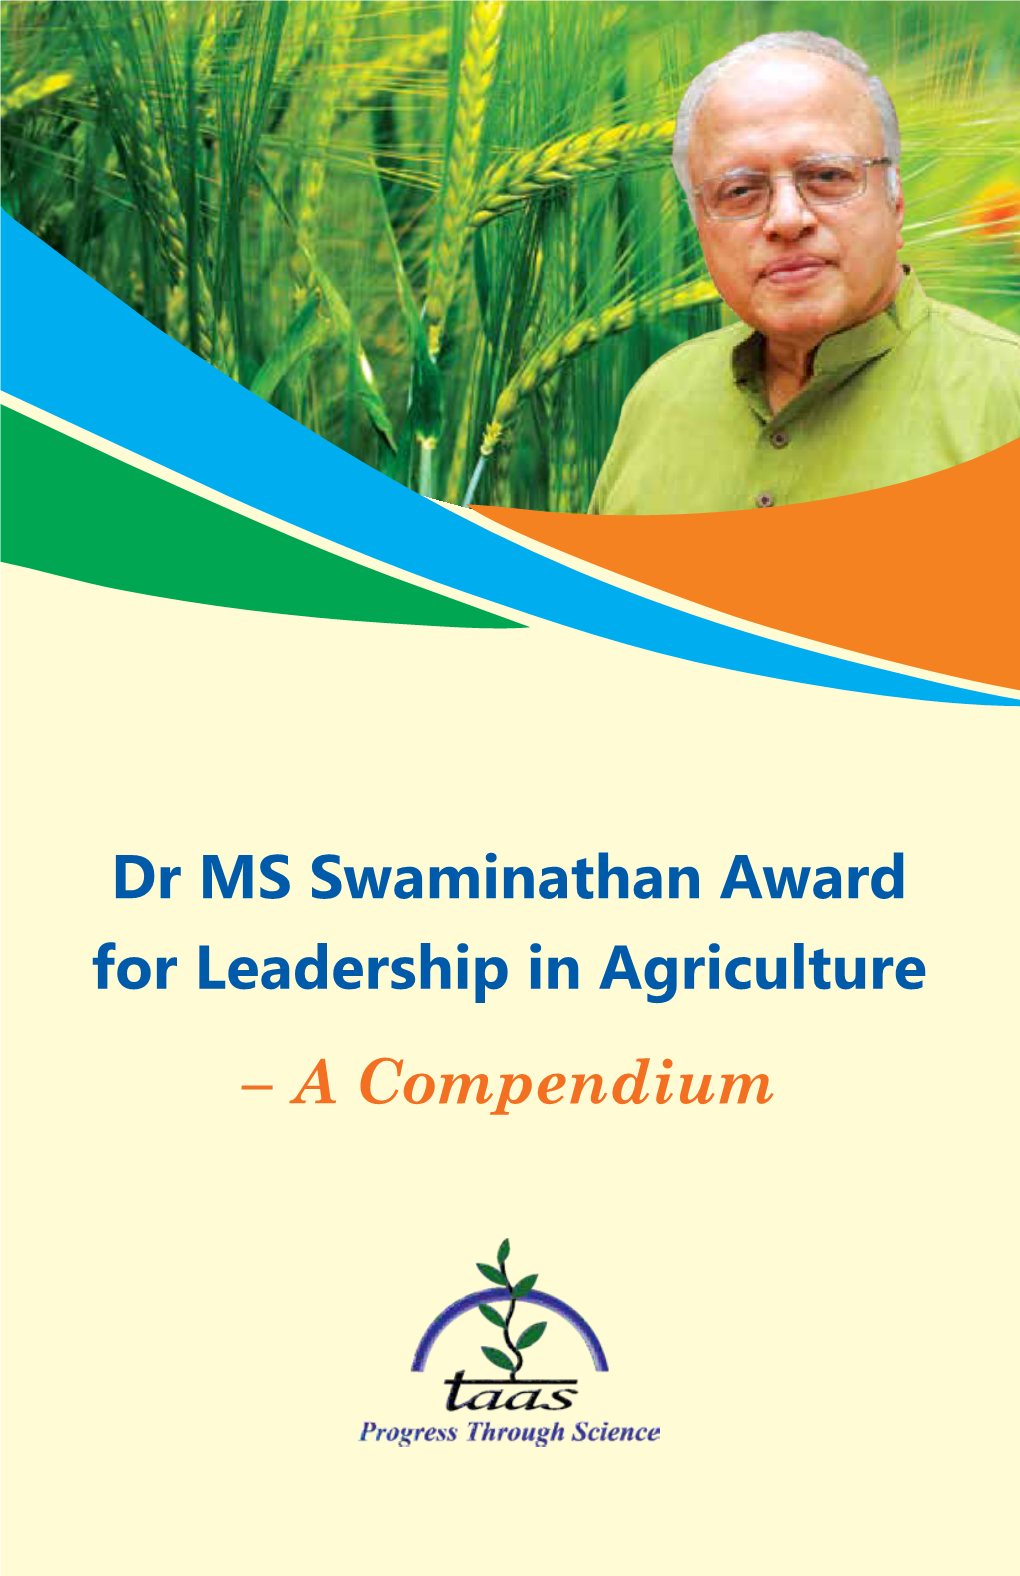 "Dr M S Swaminathan Award for Leadership in Agriculture